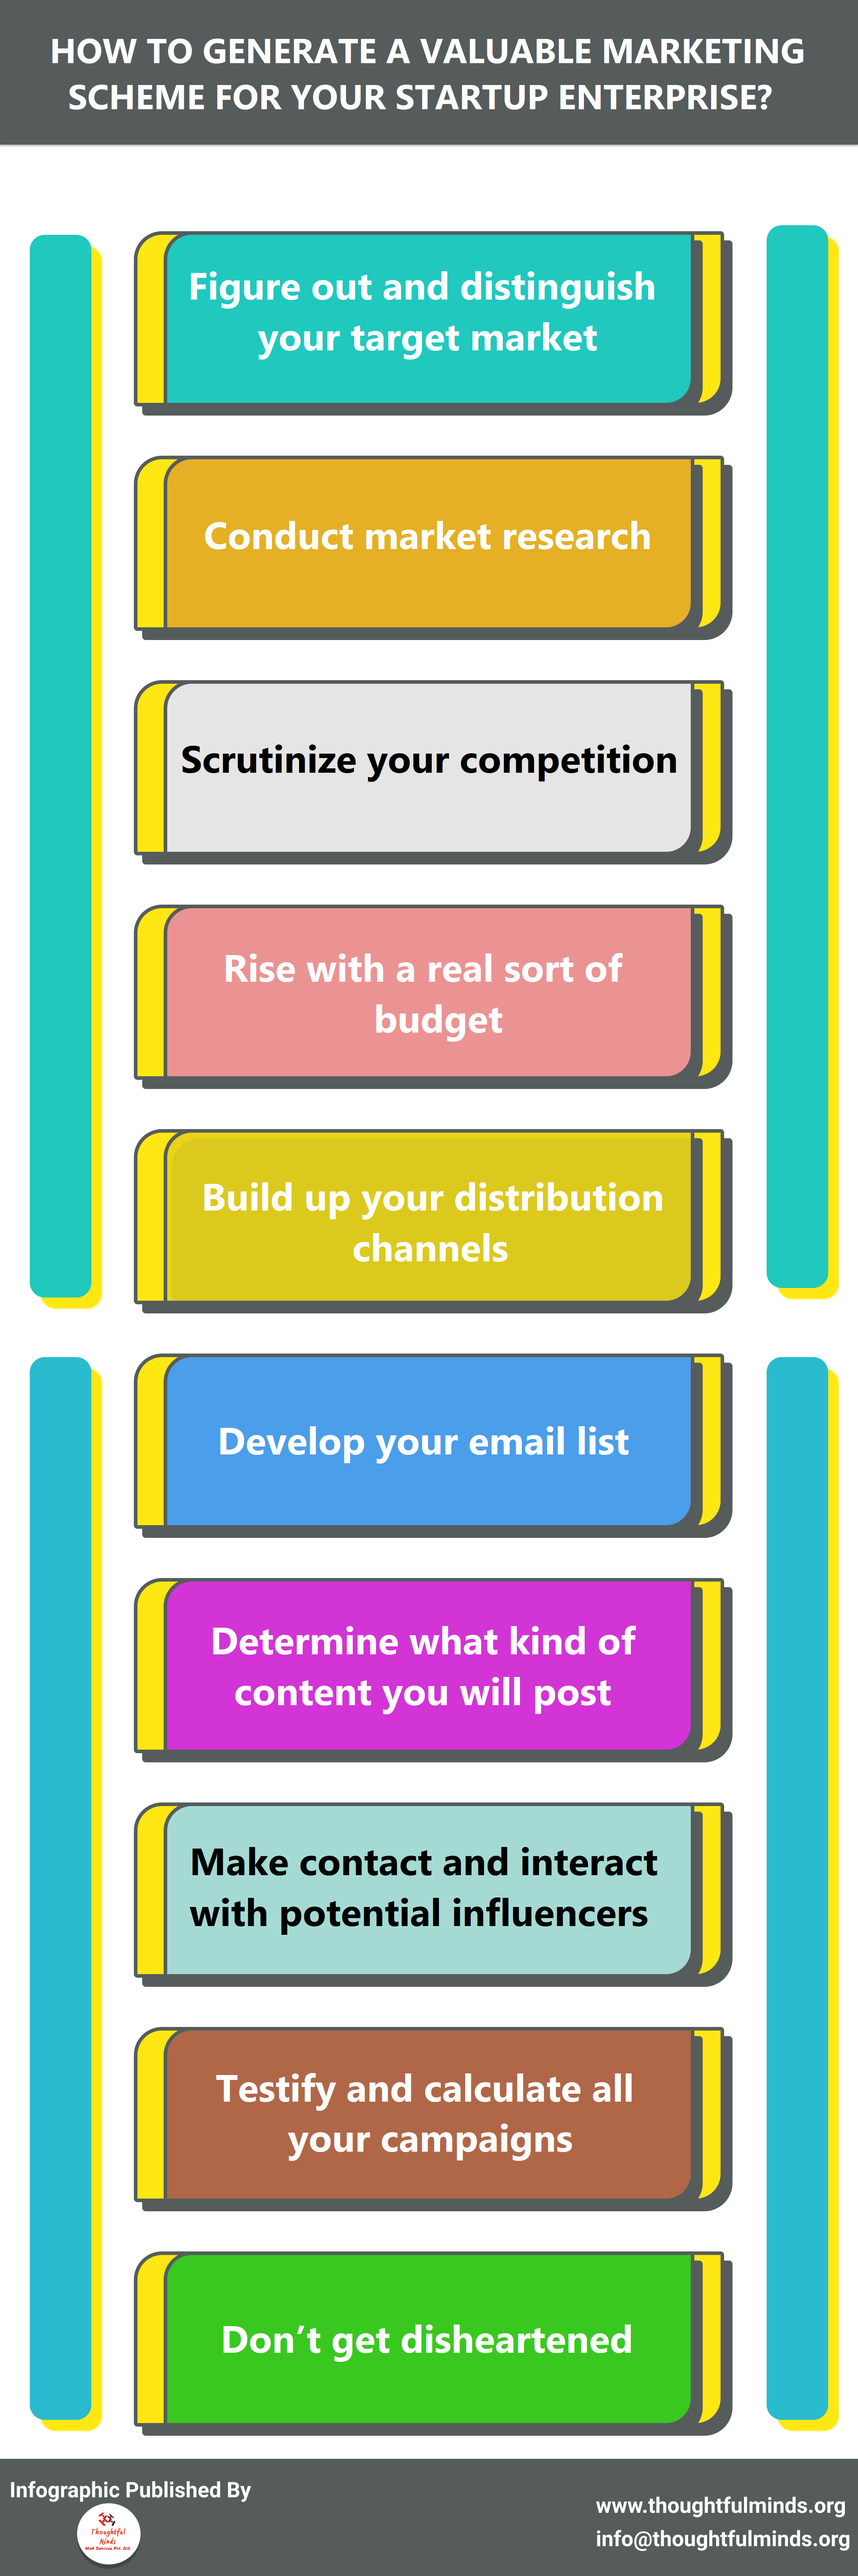 Infographic On Marketing Scheme For Startups - ThoughtfulMinds